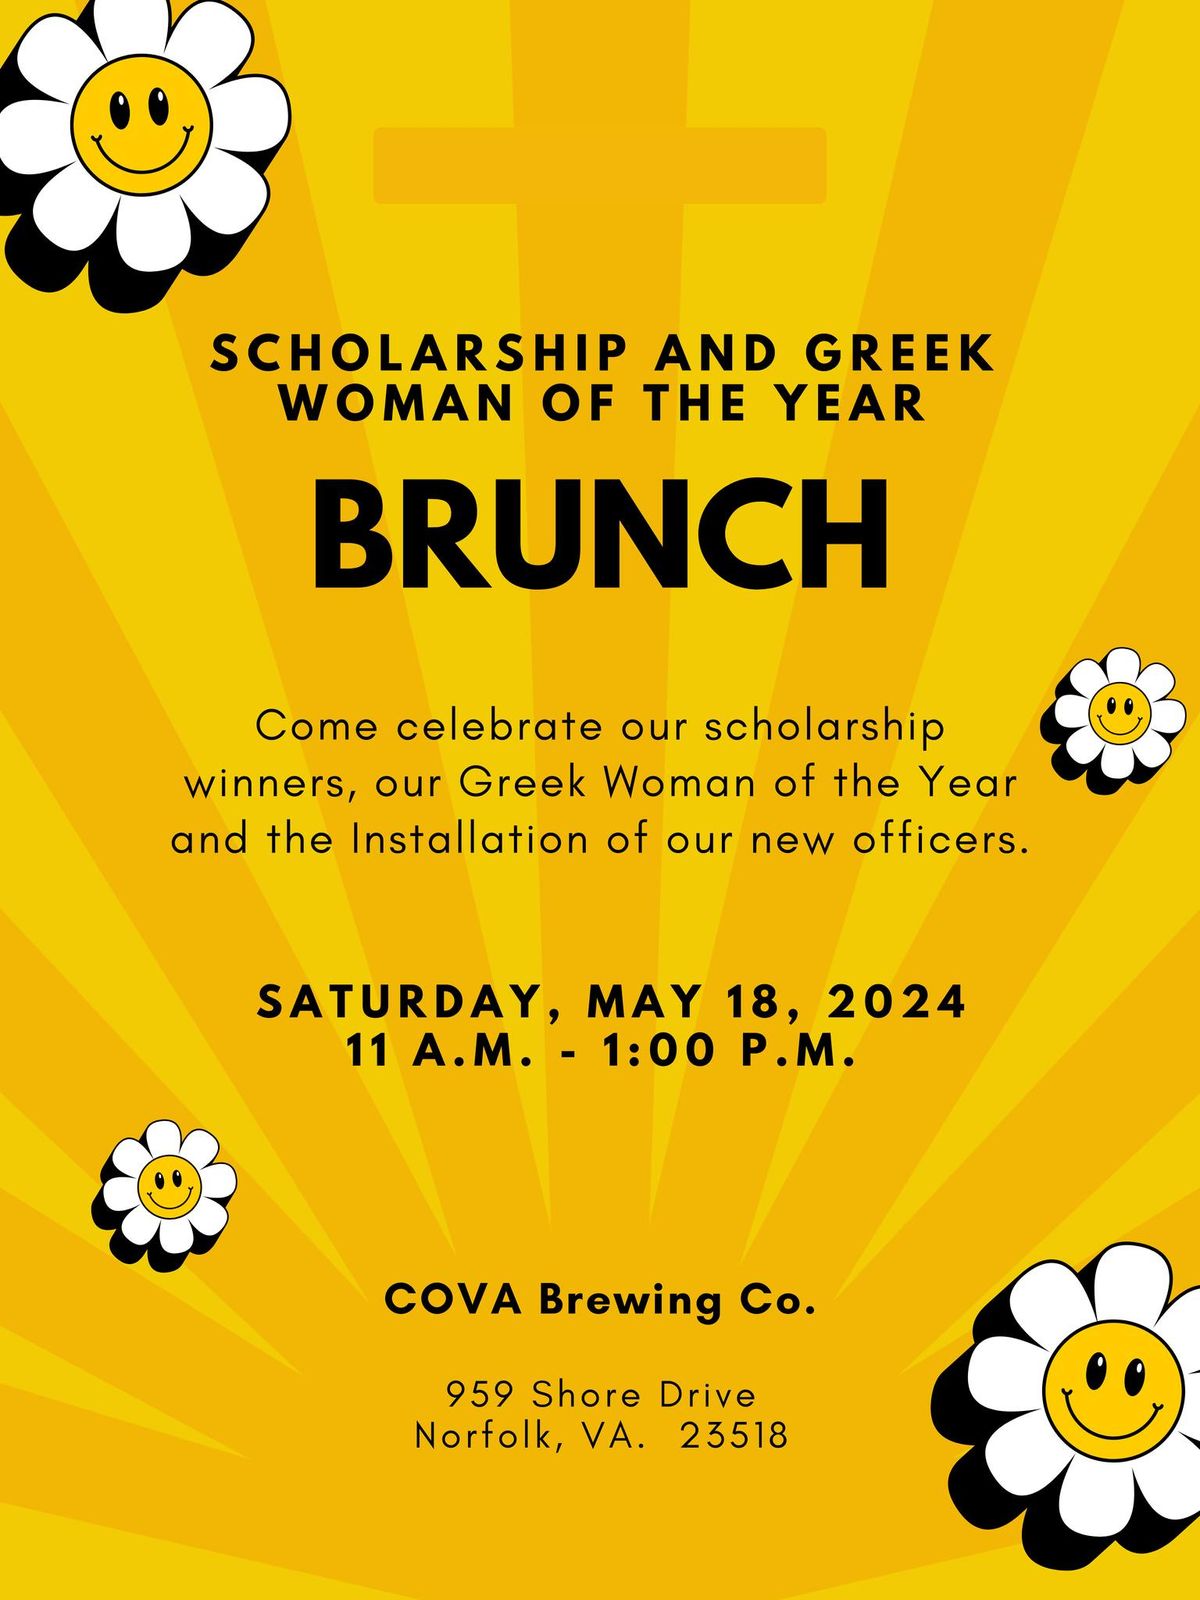 Scholarship and Greek Woman of the Year Brunch